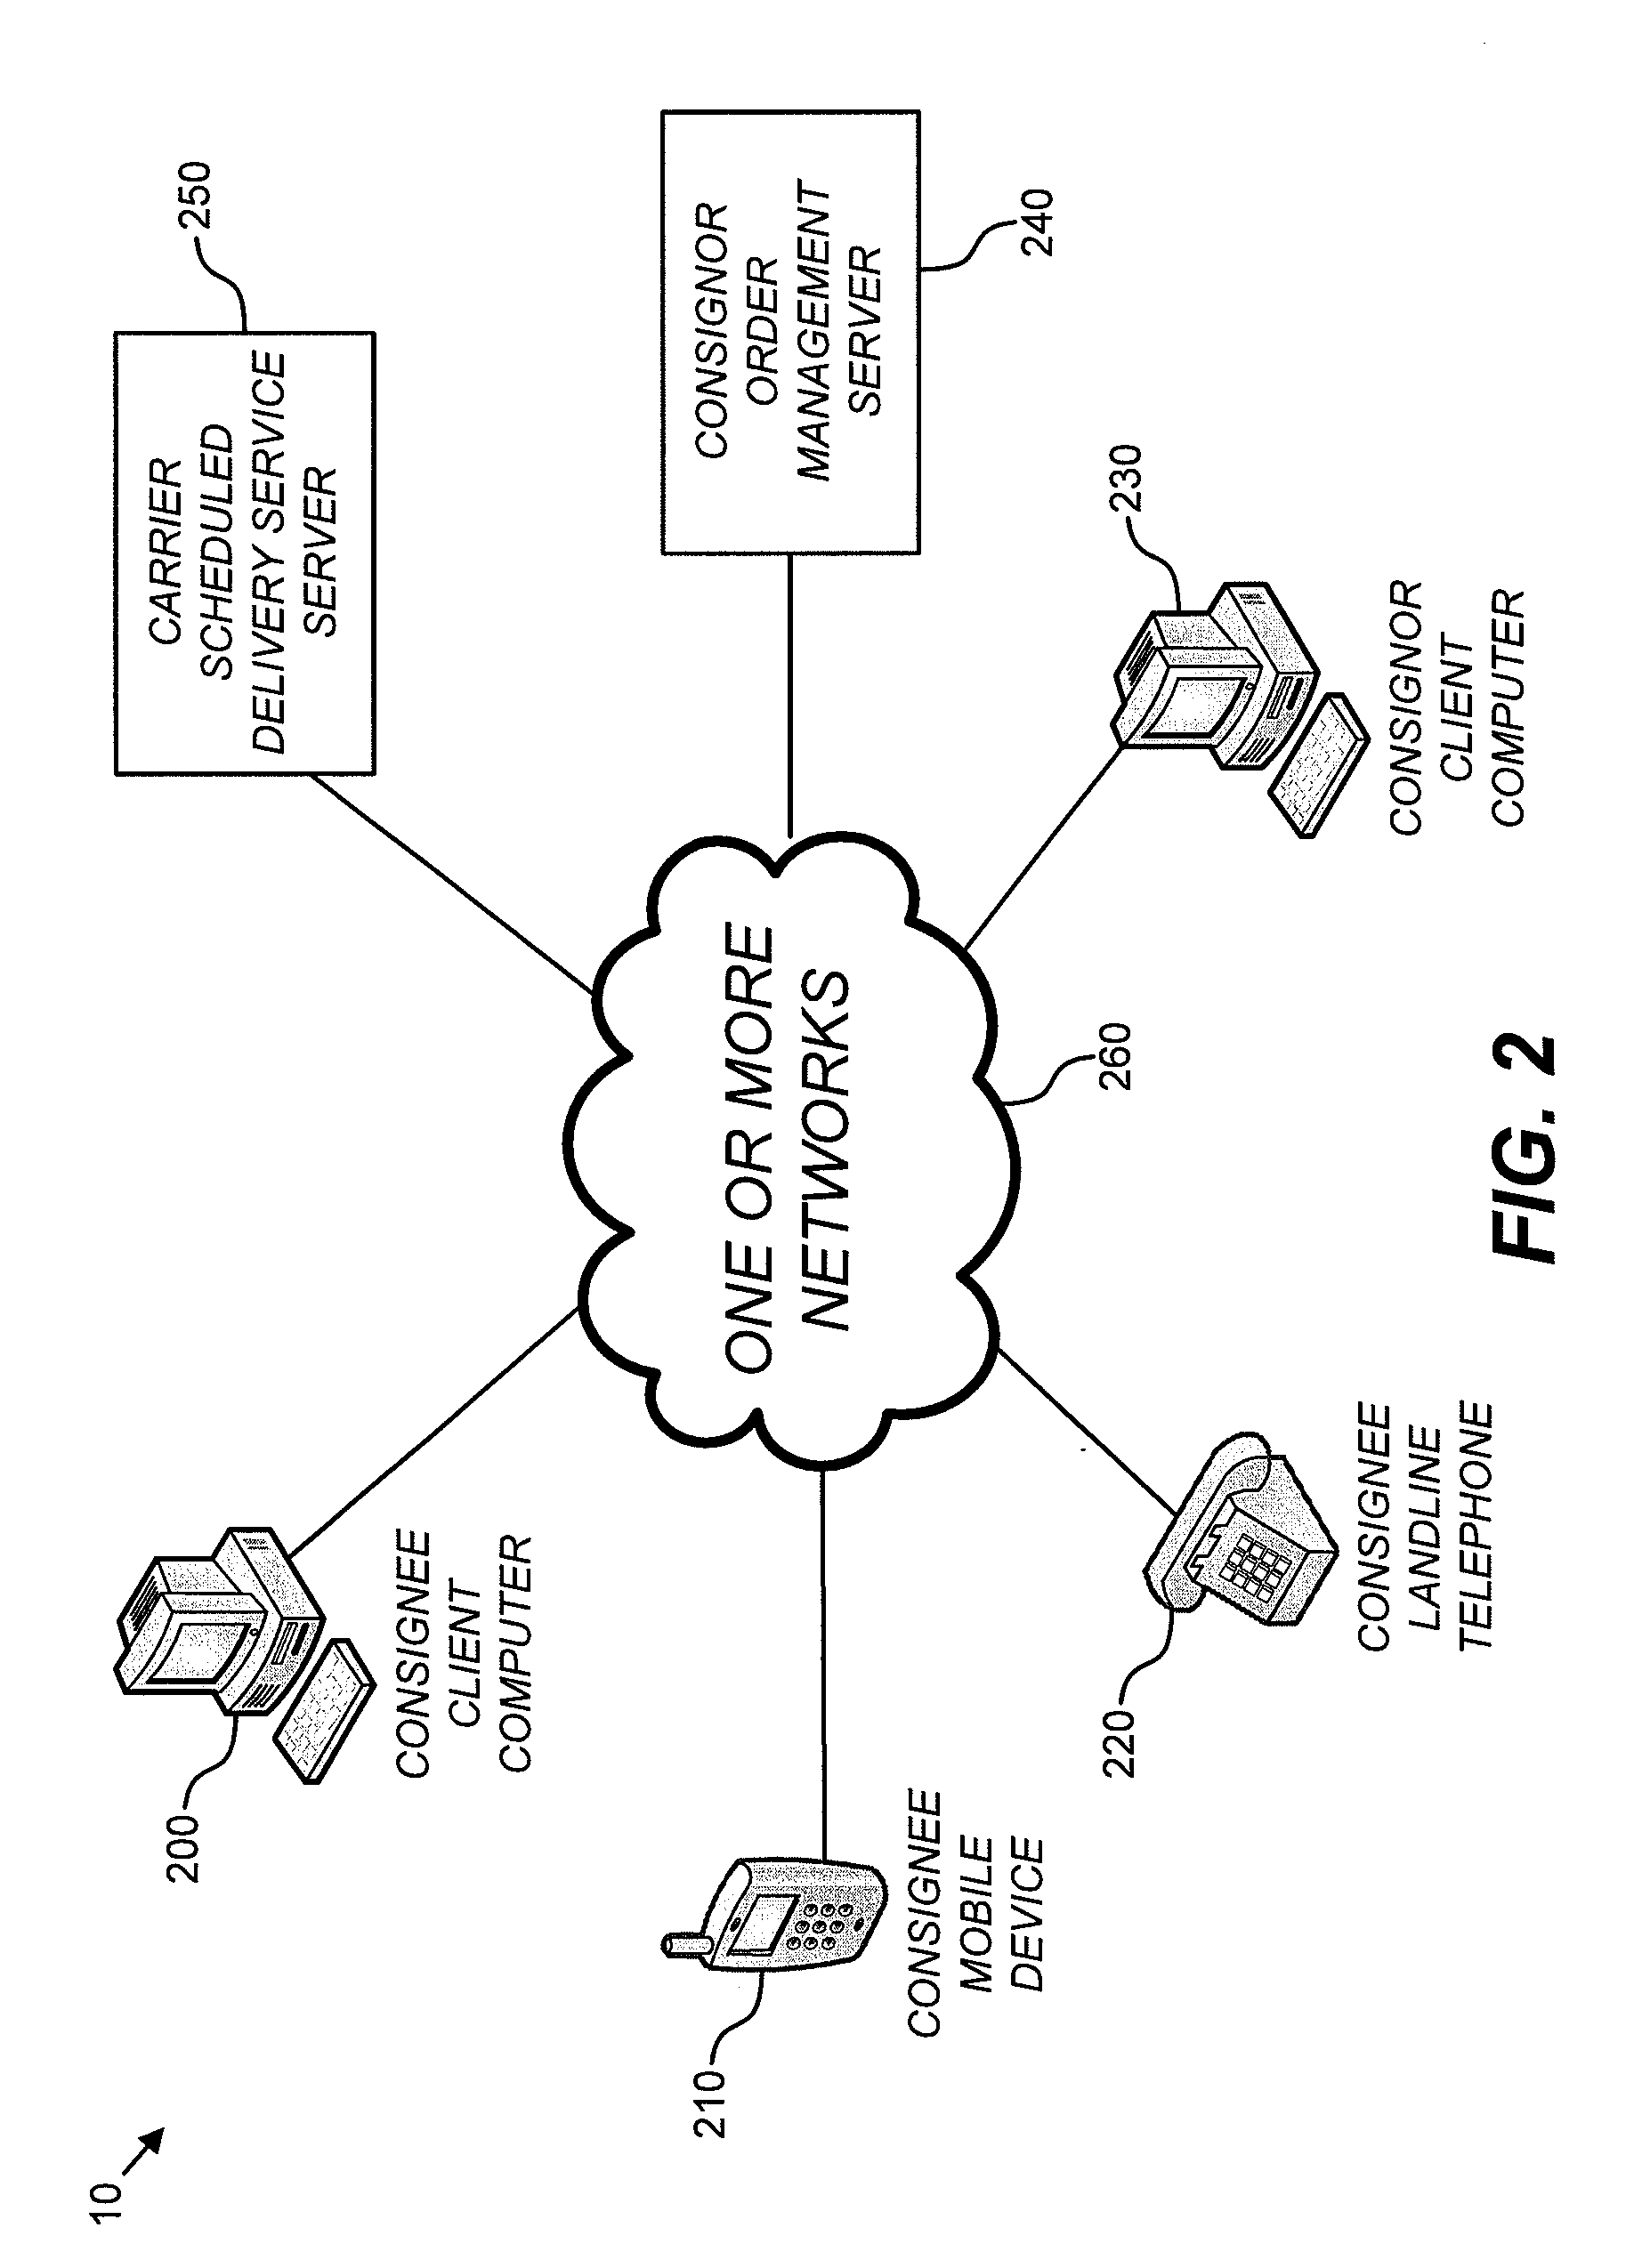 Scheduled delivery service systems, apparatuses, methods, and computer programs embodied on computer-readable media